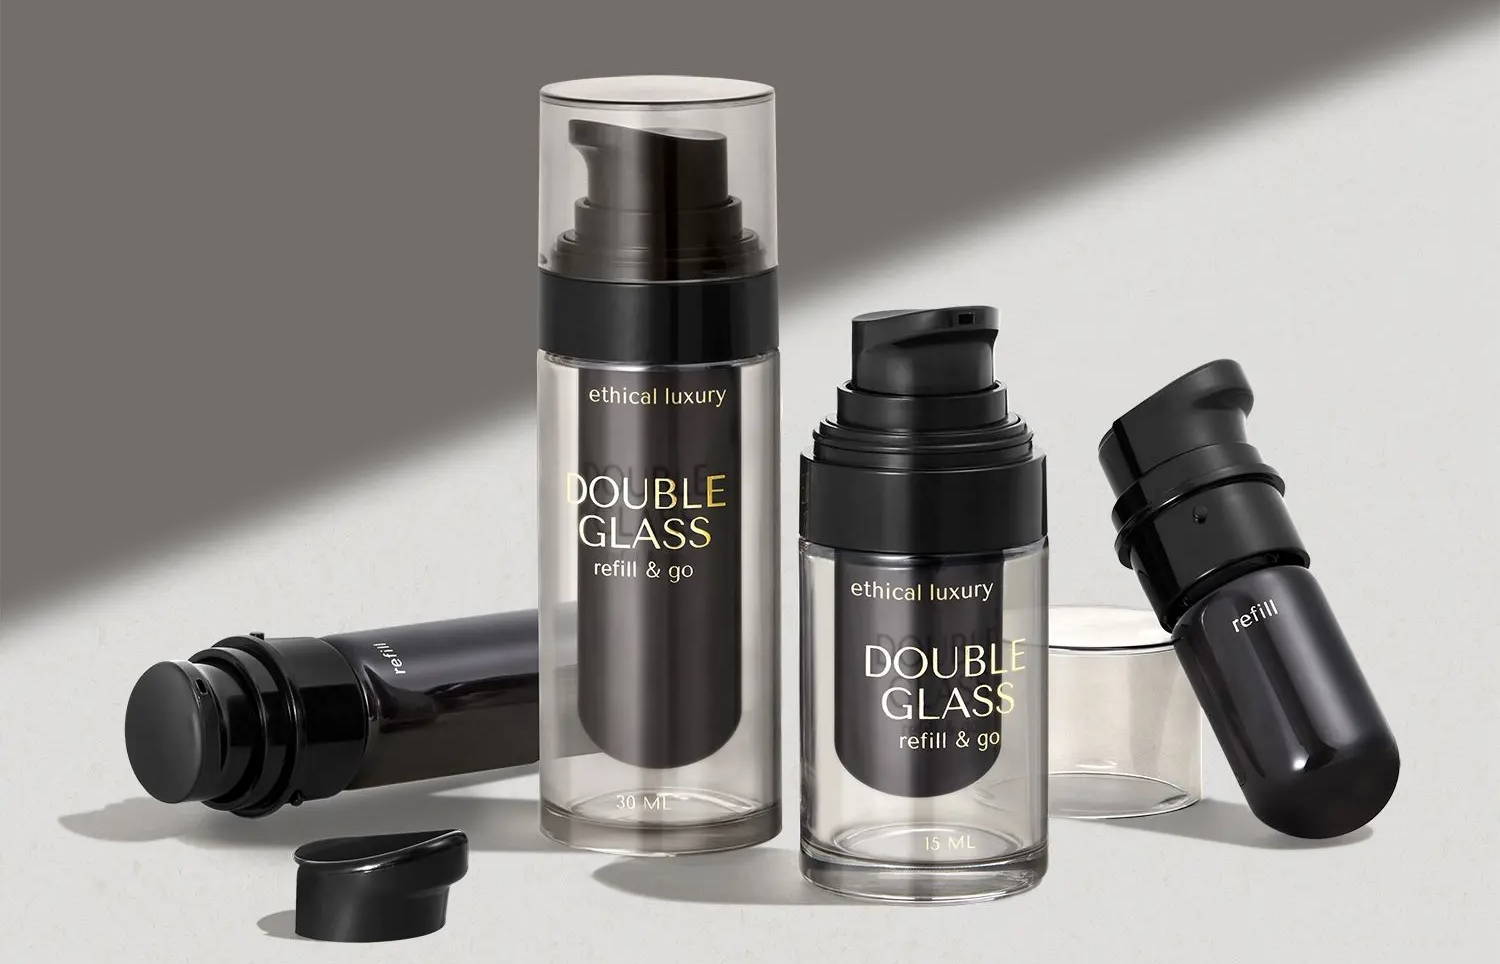 Berlin Packaging's Double Glass Refill & Go packaging system